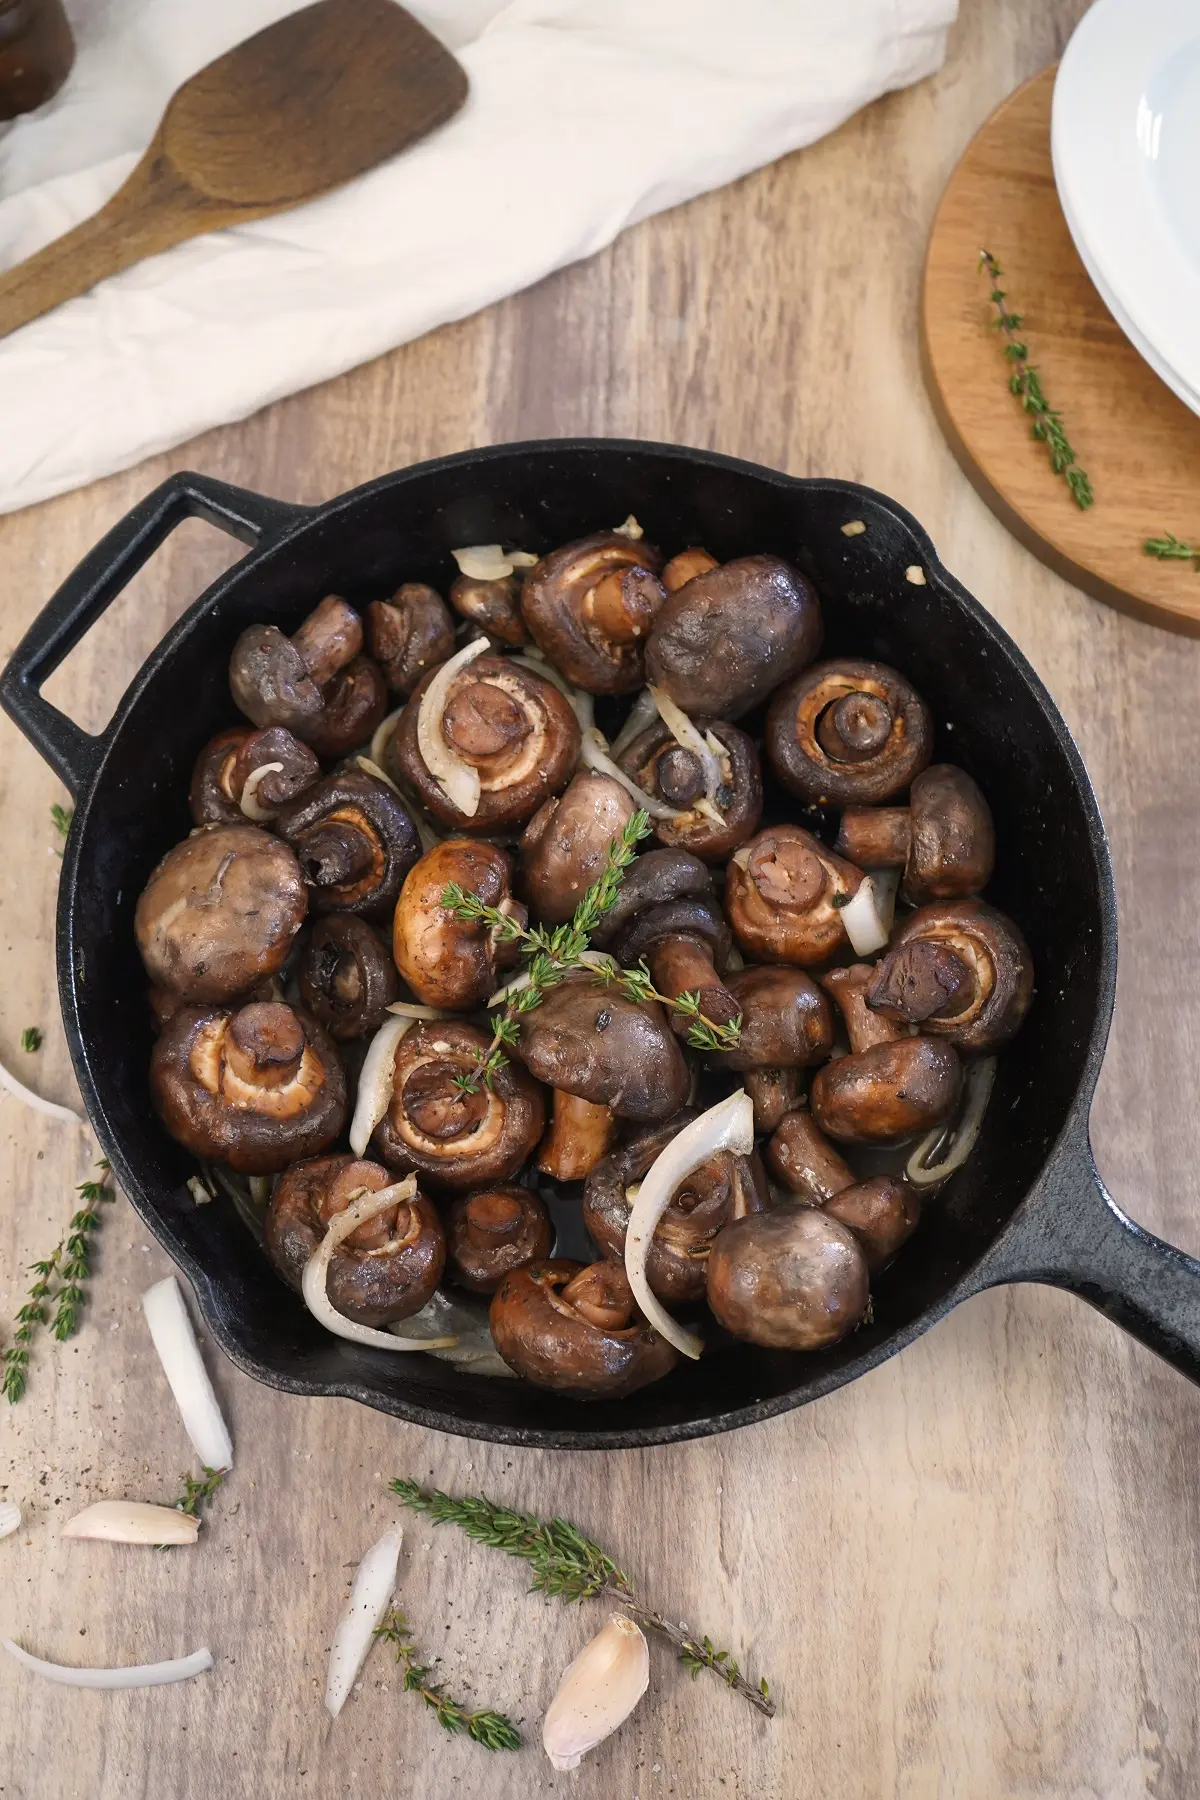 smoked mushrooms and onions - Should you soak mushrooms before frying